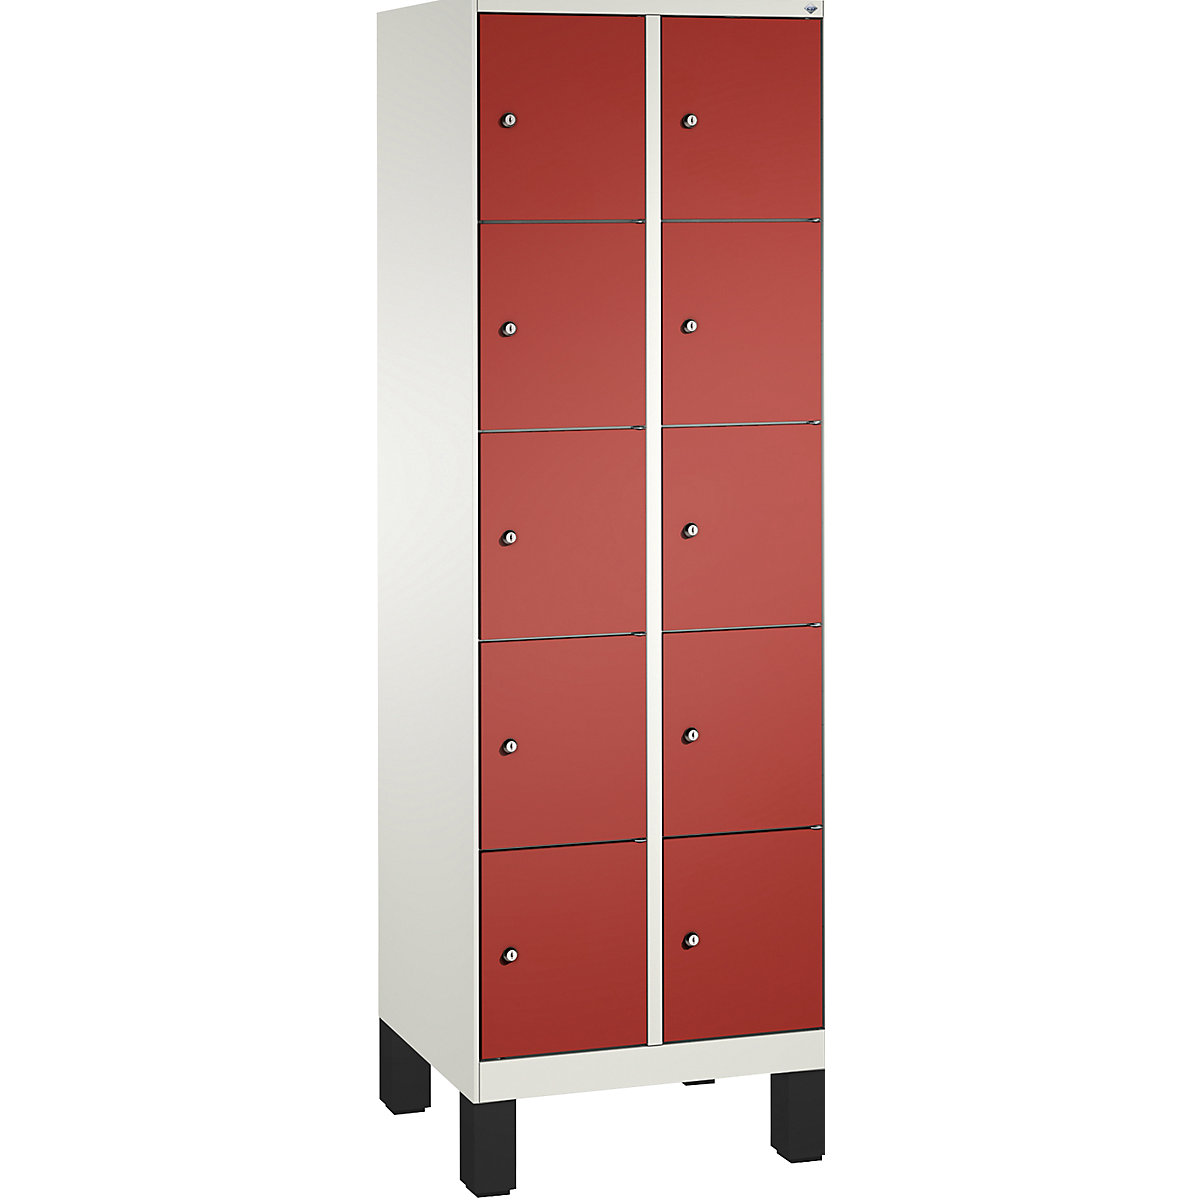 EVOLO locker unit, with feet – C+P, 2 compartments, 5 shelf compartments each, compartment width 300 mm, traffic white / flame red-11